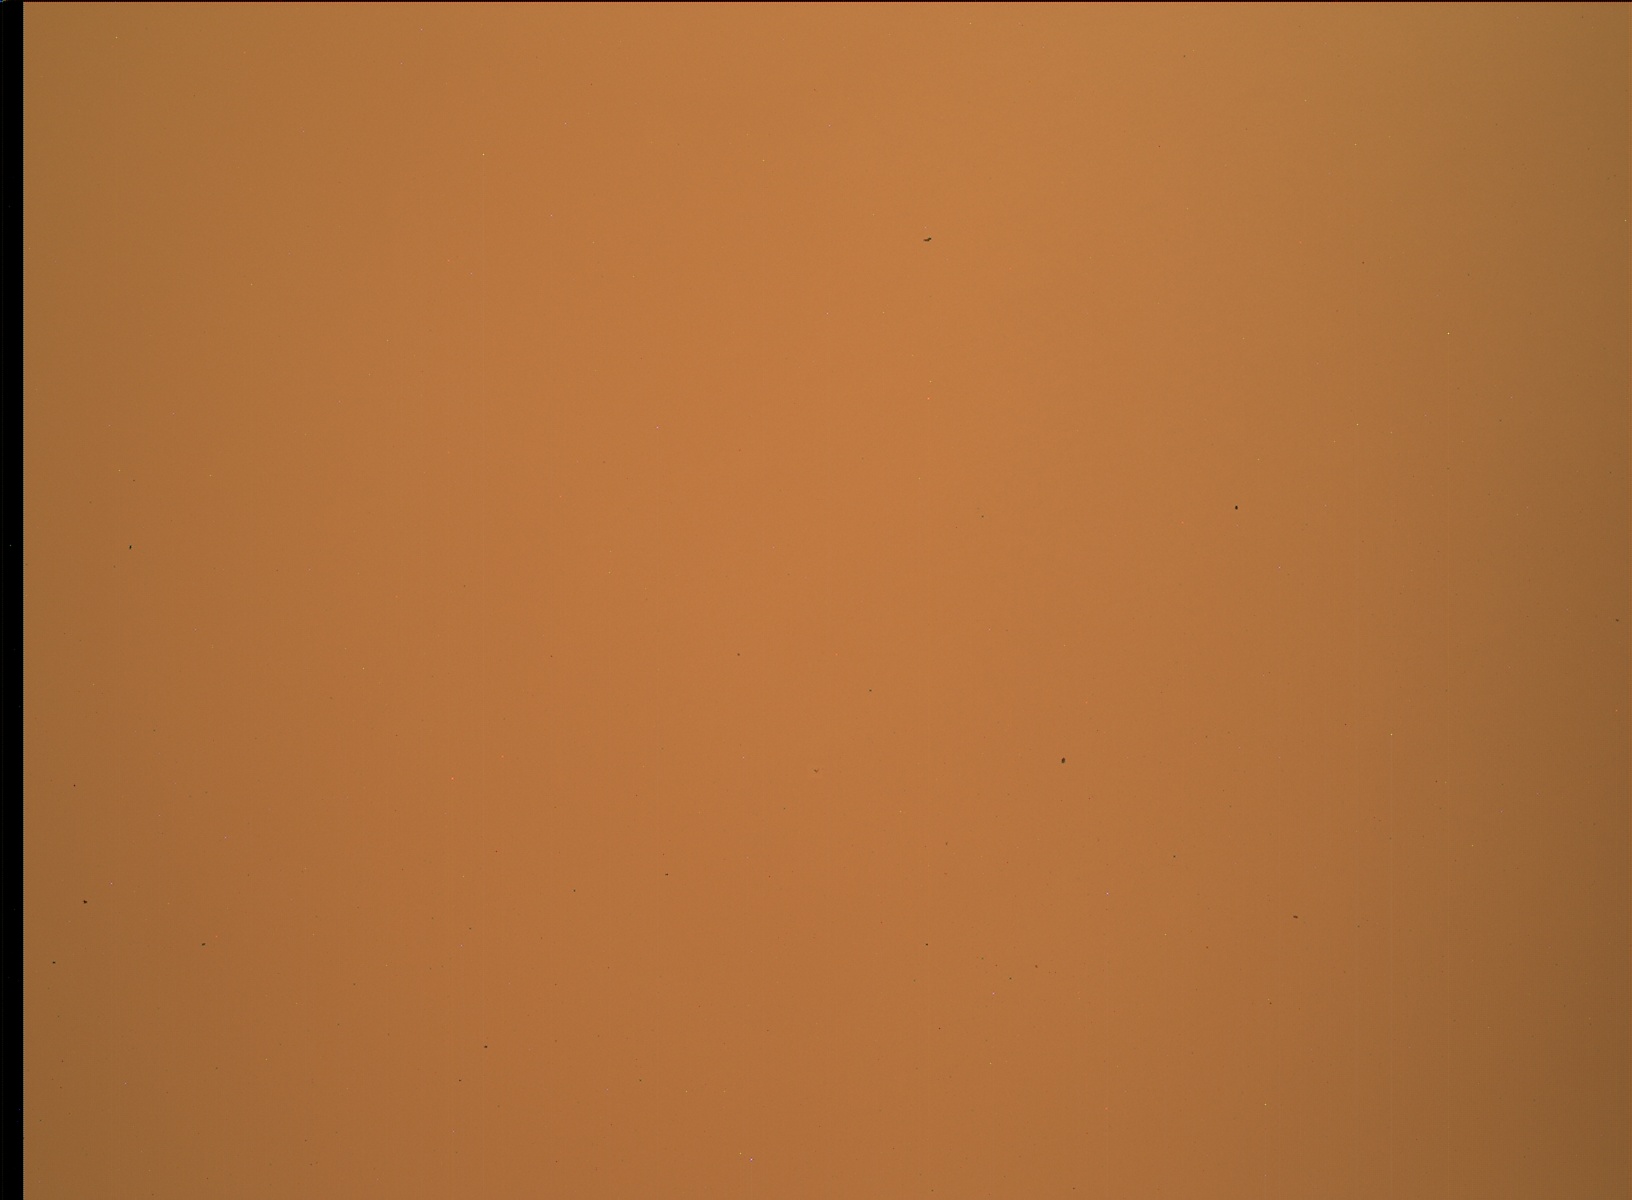 Nasa's Mars rover Curiosity acquired this image using its Mars Hand Lens Imager (MAHLI) on Sol 2852, at drive 2176, site number 82